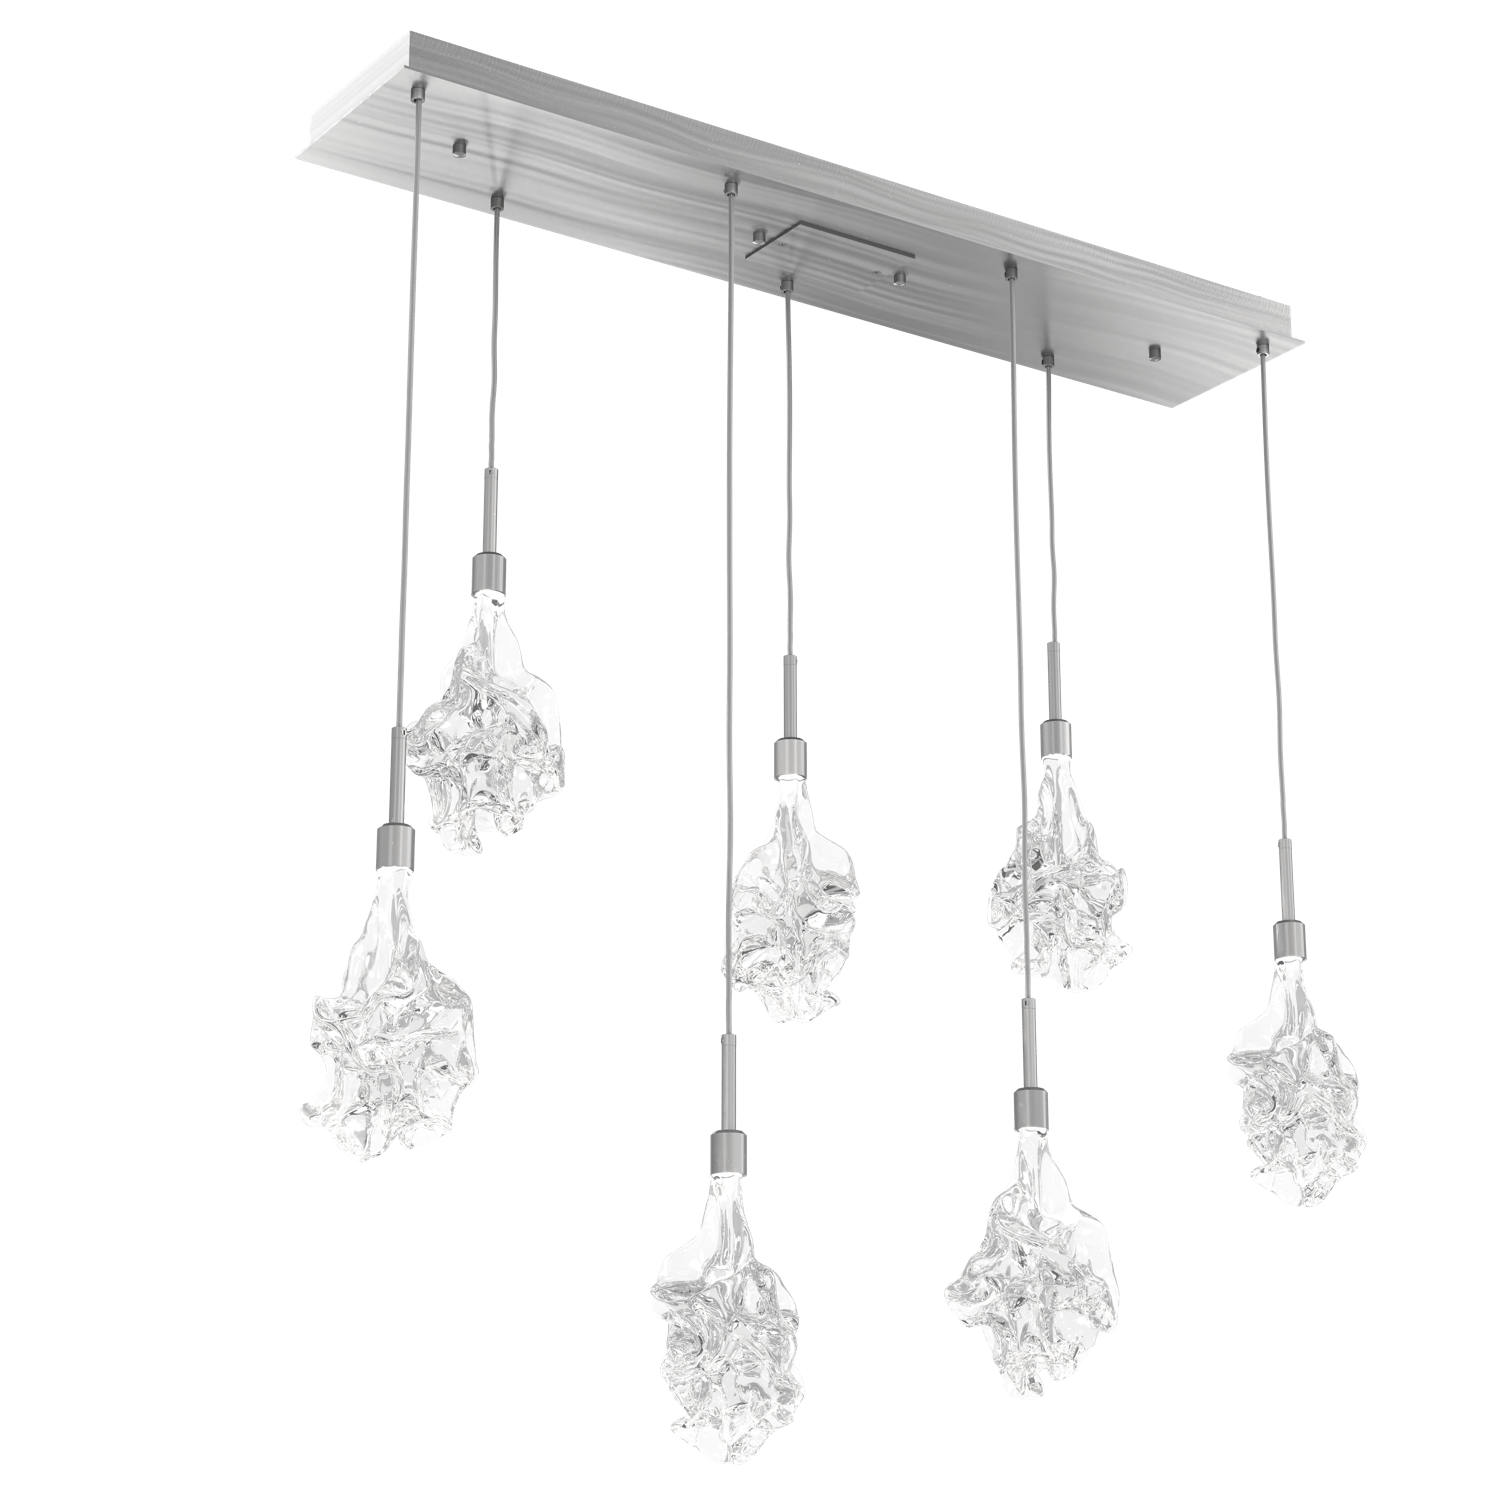 PLB0059-07-SN-Hammerton-Studio-Blossom-7-light-linear-pendant-chandelier-with-satin-nickel-finish-and-clear-handblown-crystal-glass-shades-and-LED-lamping